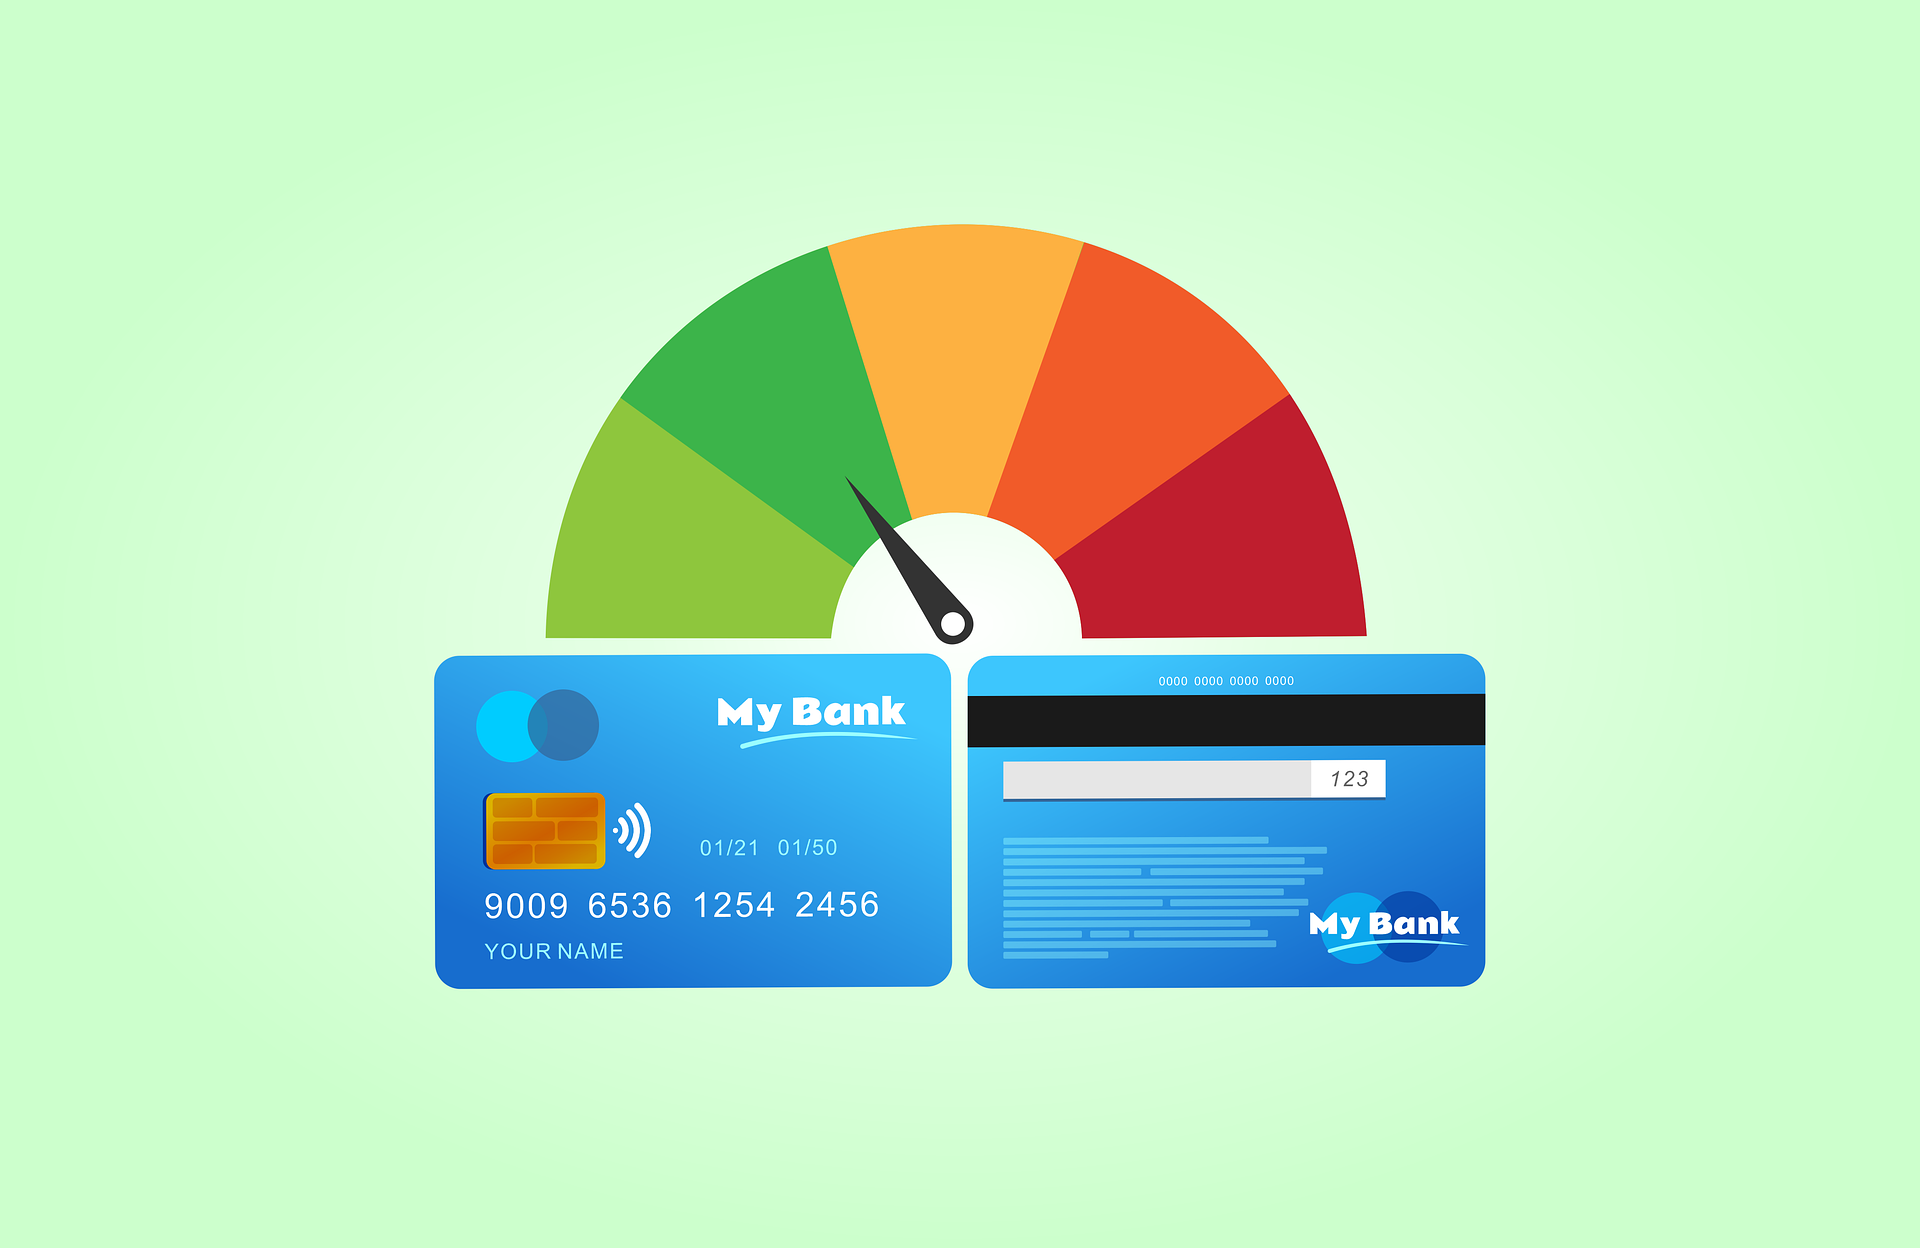 How Does Your Credit Score Impact Personal Loan Approval and Terms